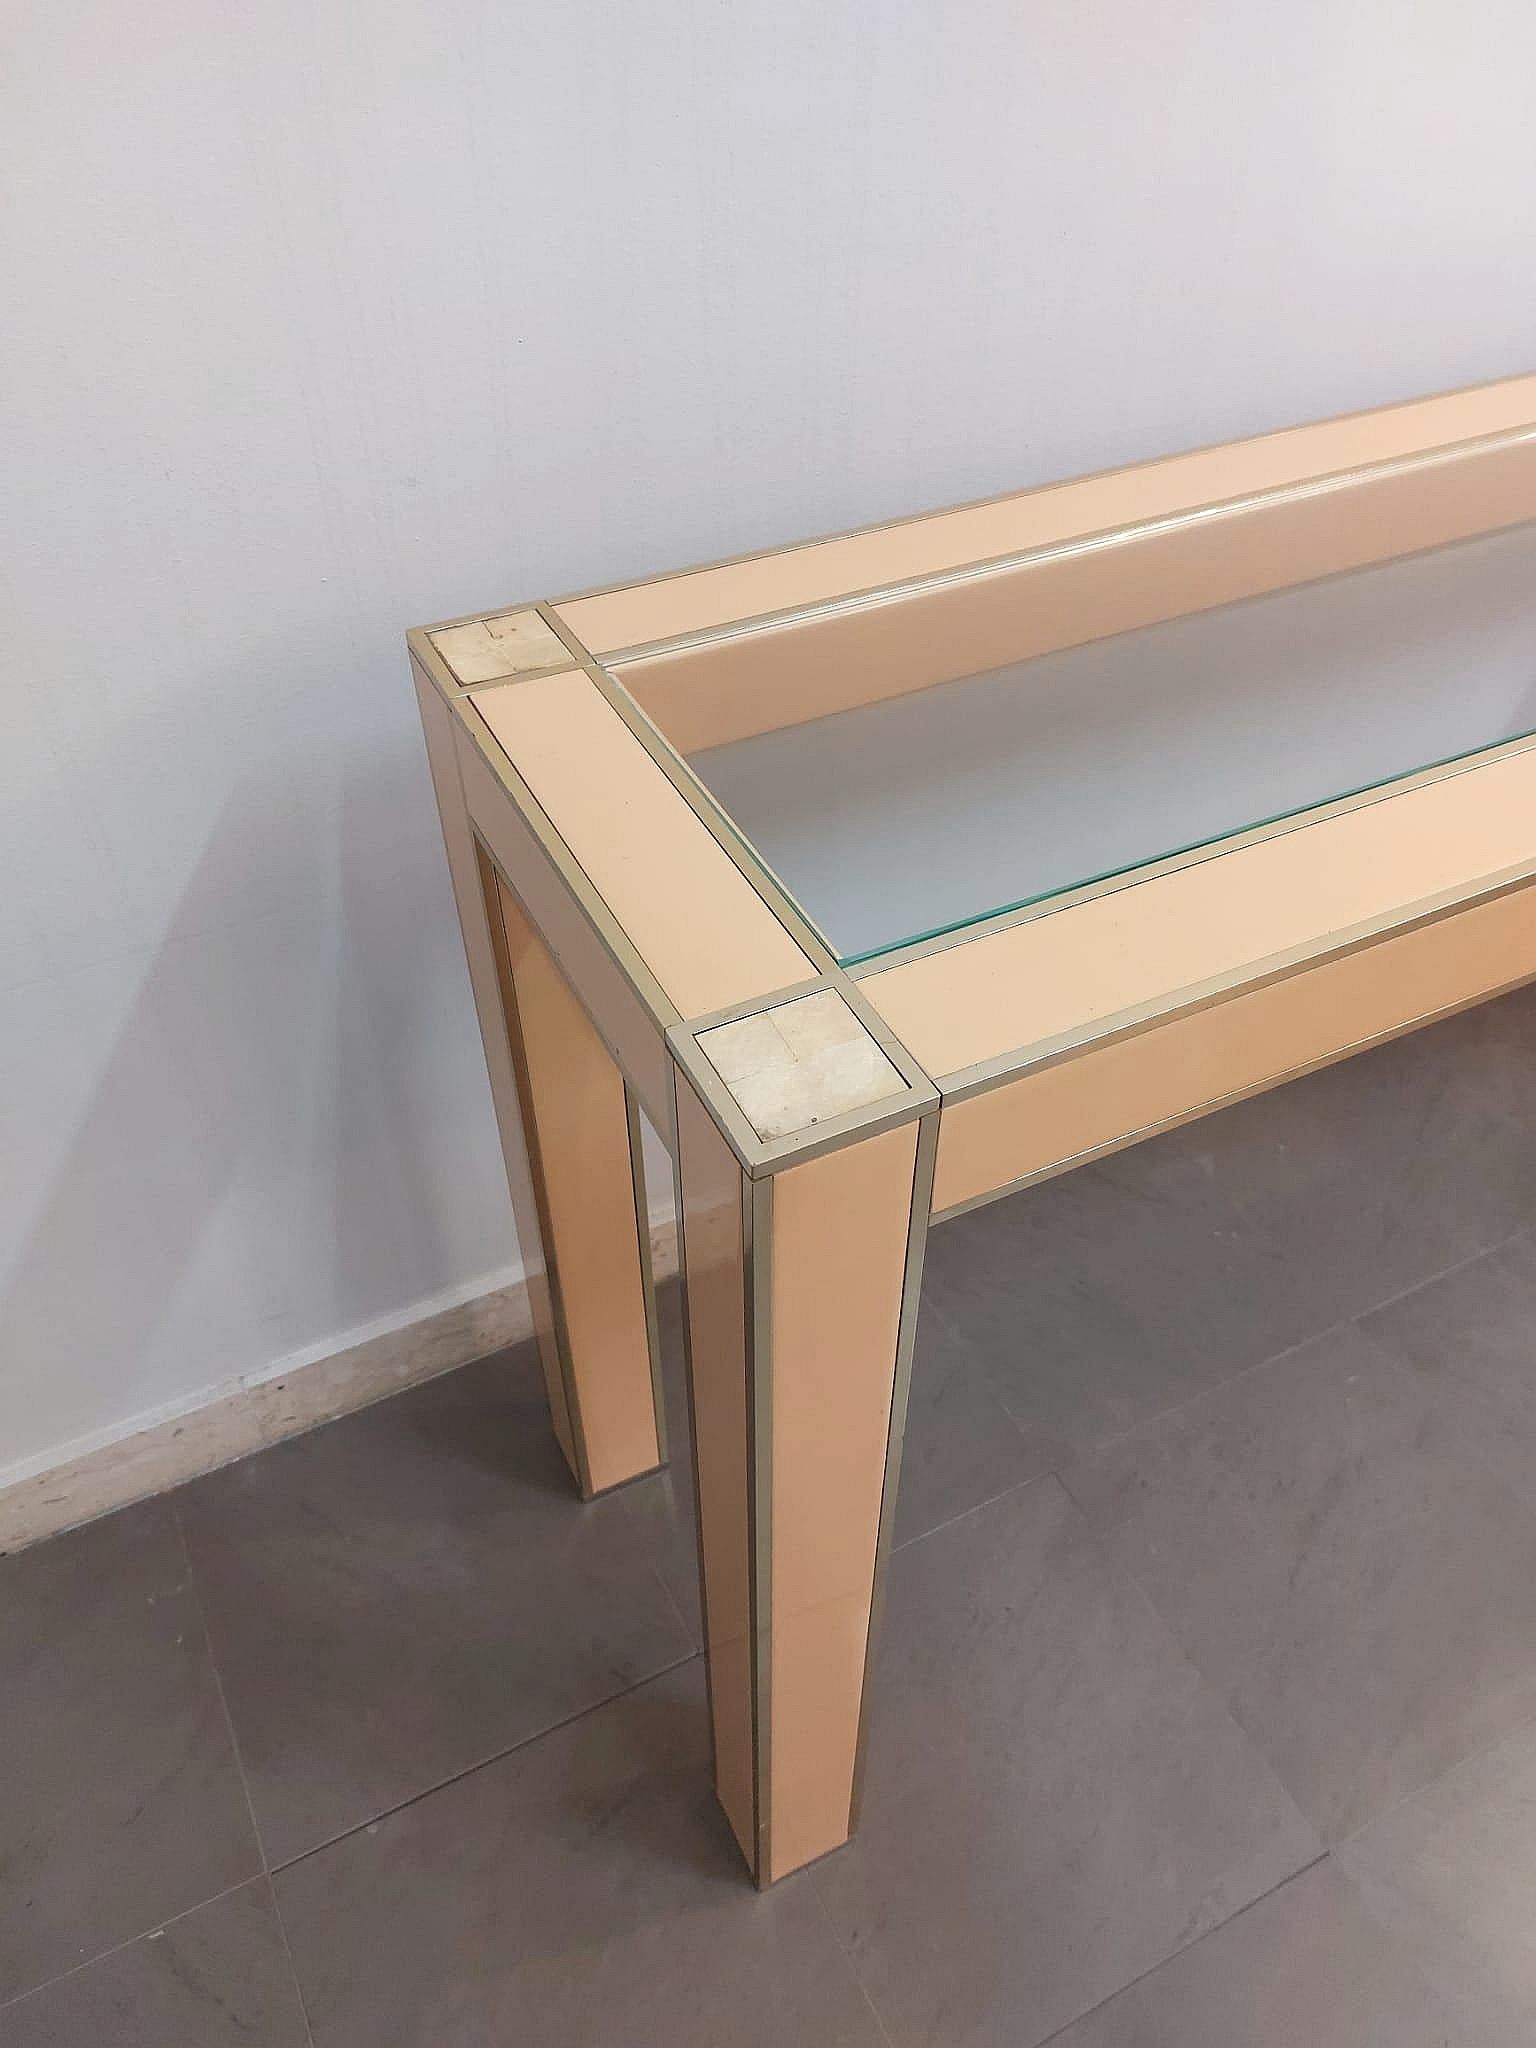 Midcentury Modern Console Table Lacquered Wood Glass Aluminum Italy 1970s In Good Condition For Sale In Palermo, IT